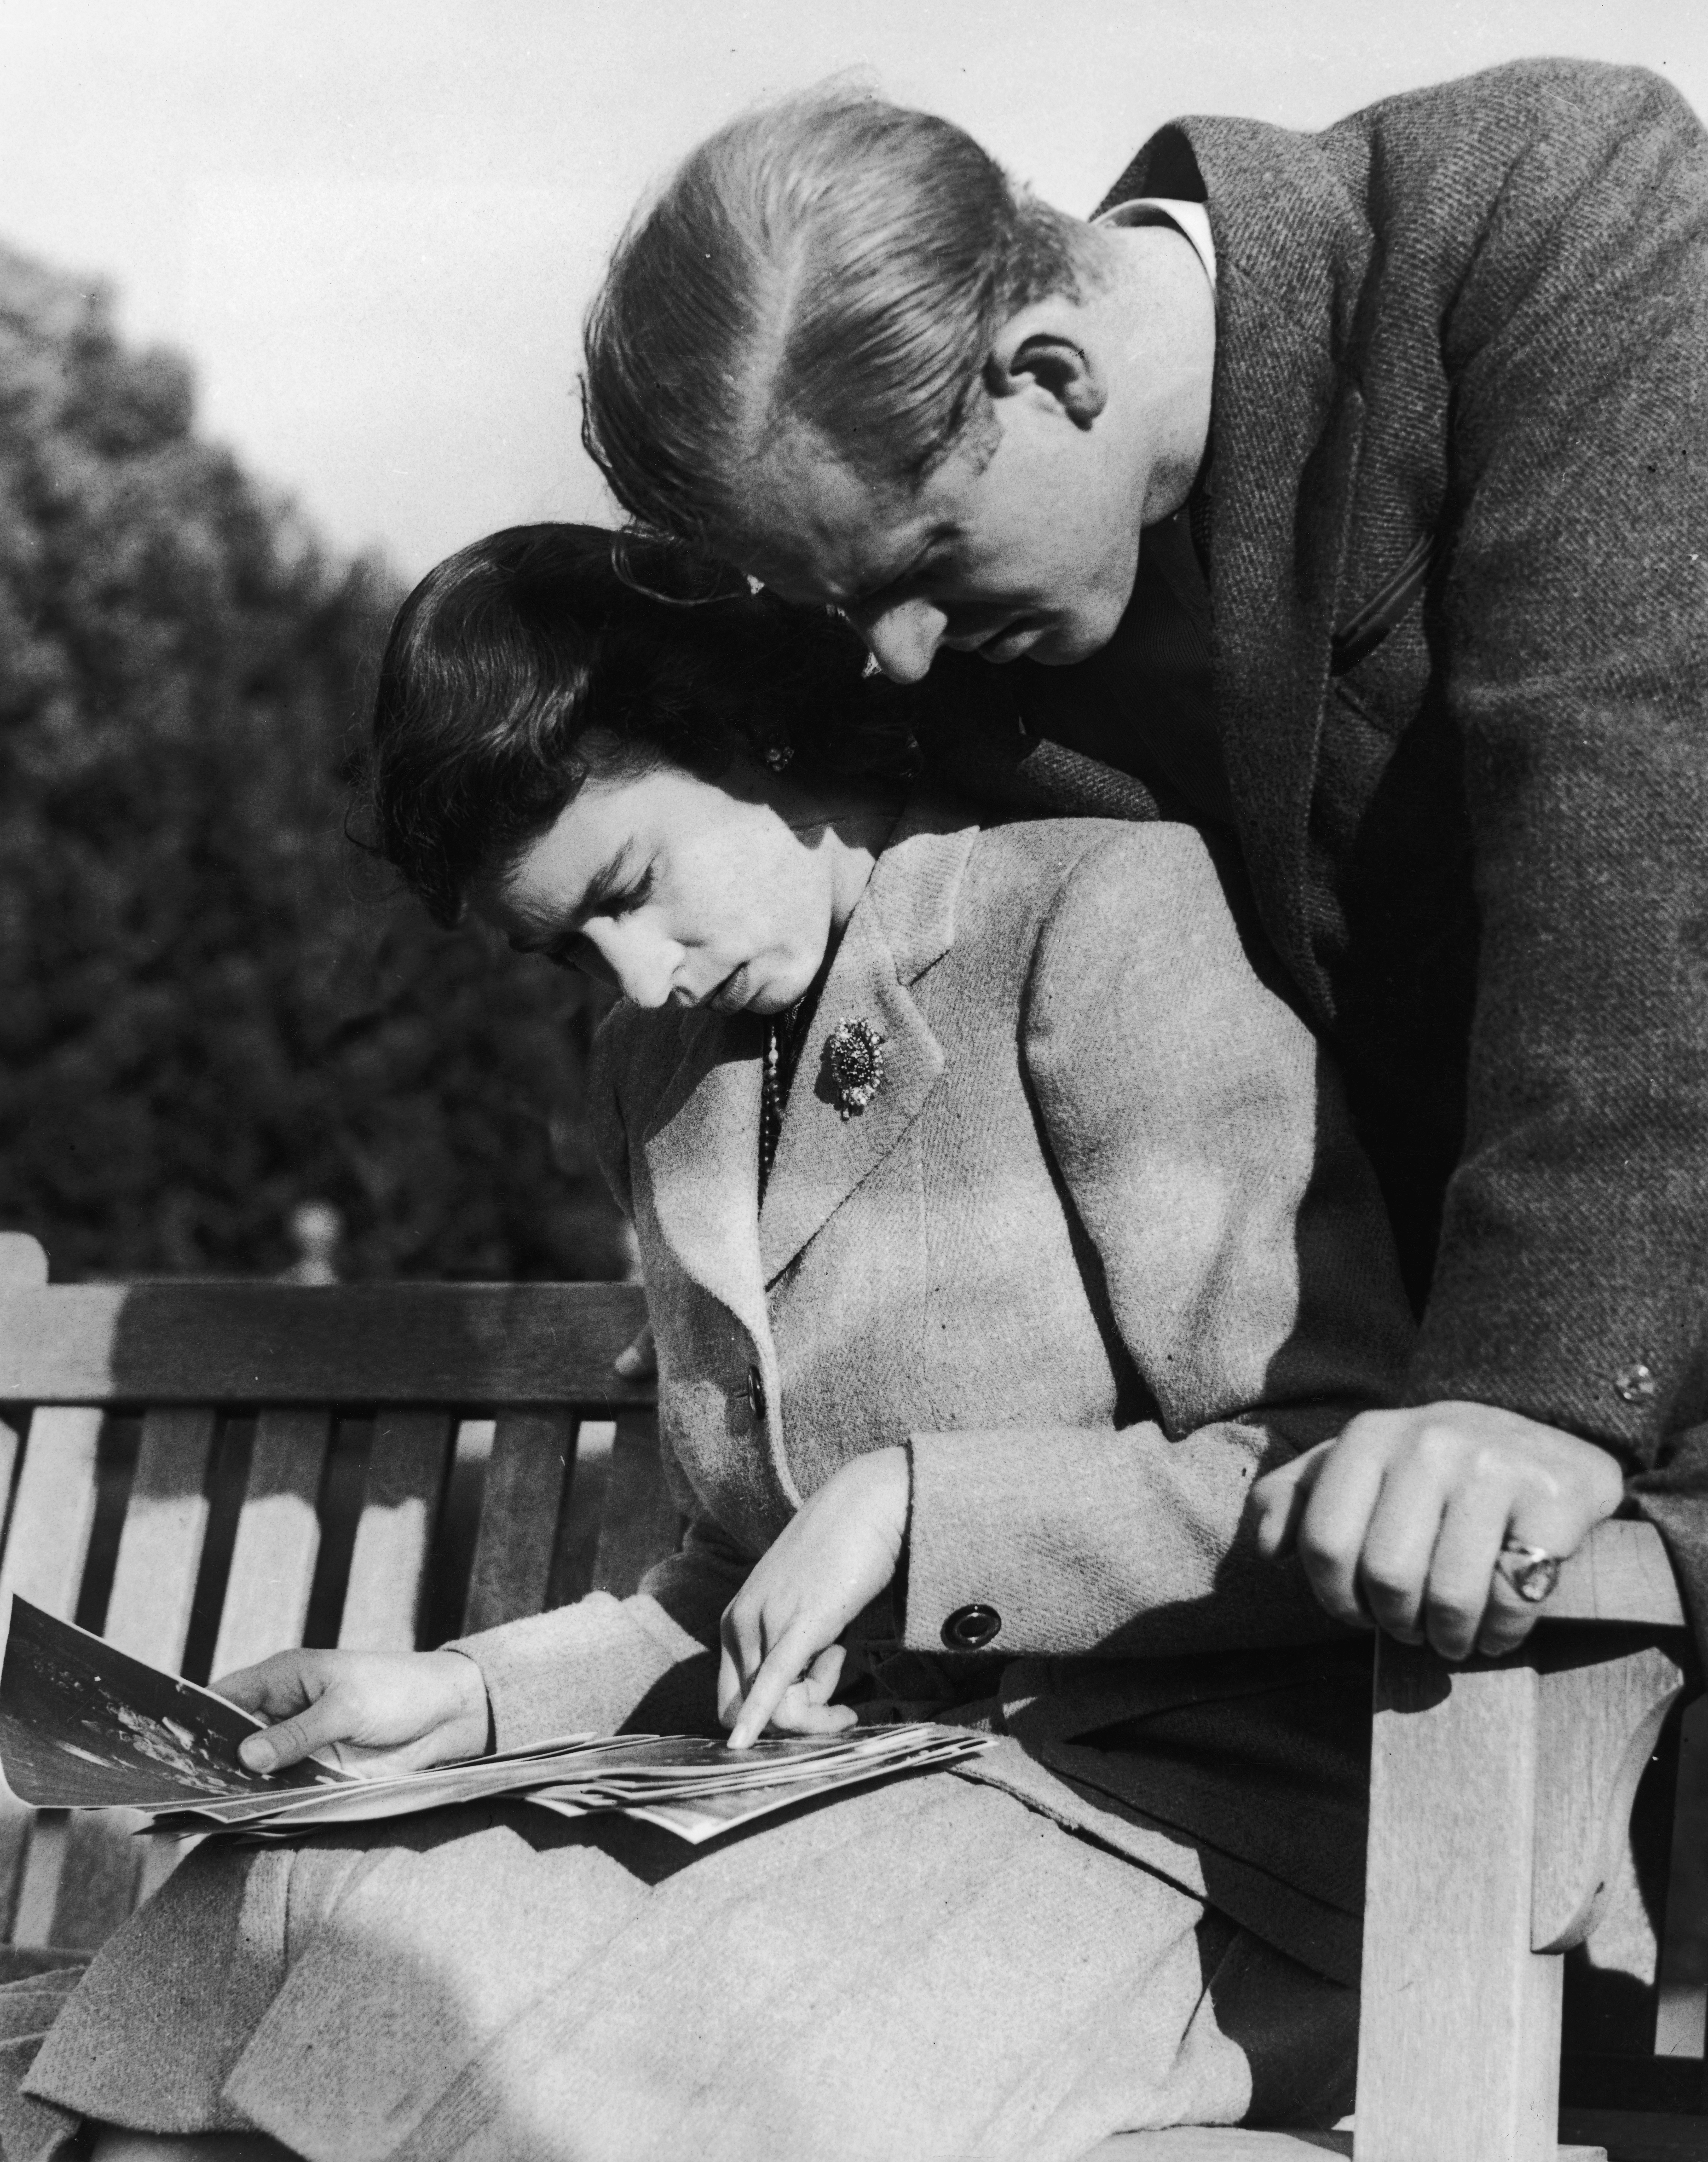 Princess Elizabeth and Prince Philip look through a photo album during their honeymoon in Hampshire on November 23, 1947.